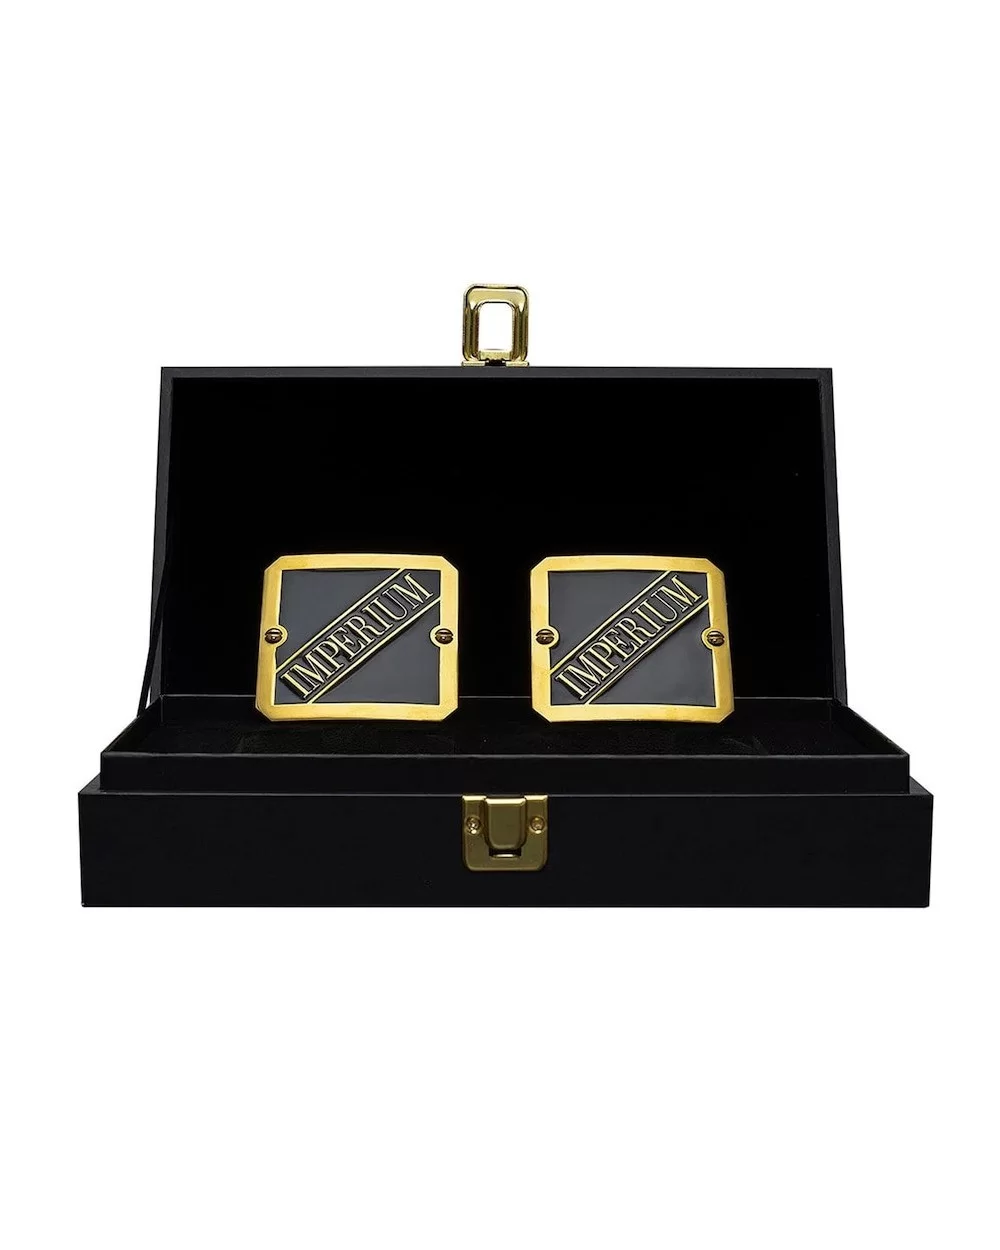 Imperium NXT Championship Replica Side Plate Box Set $26.32 Collectibles